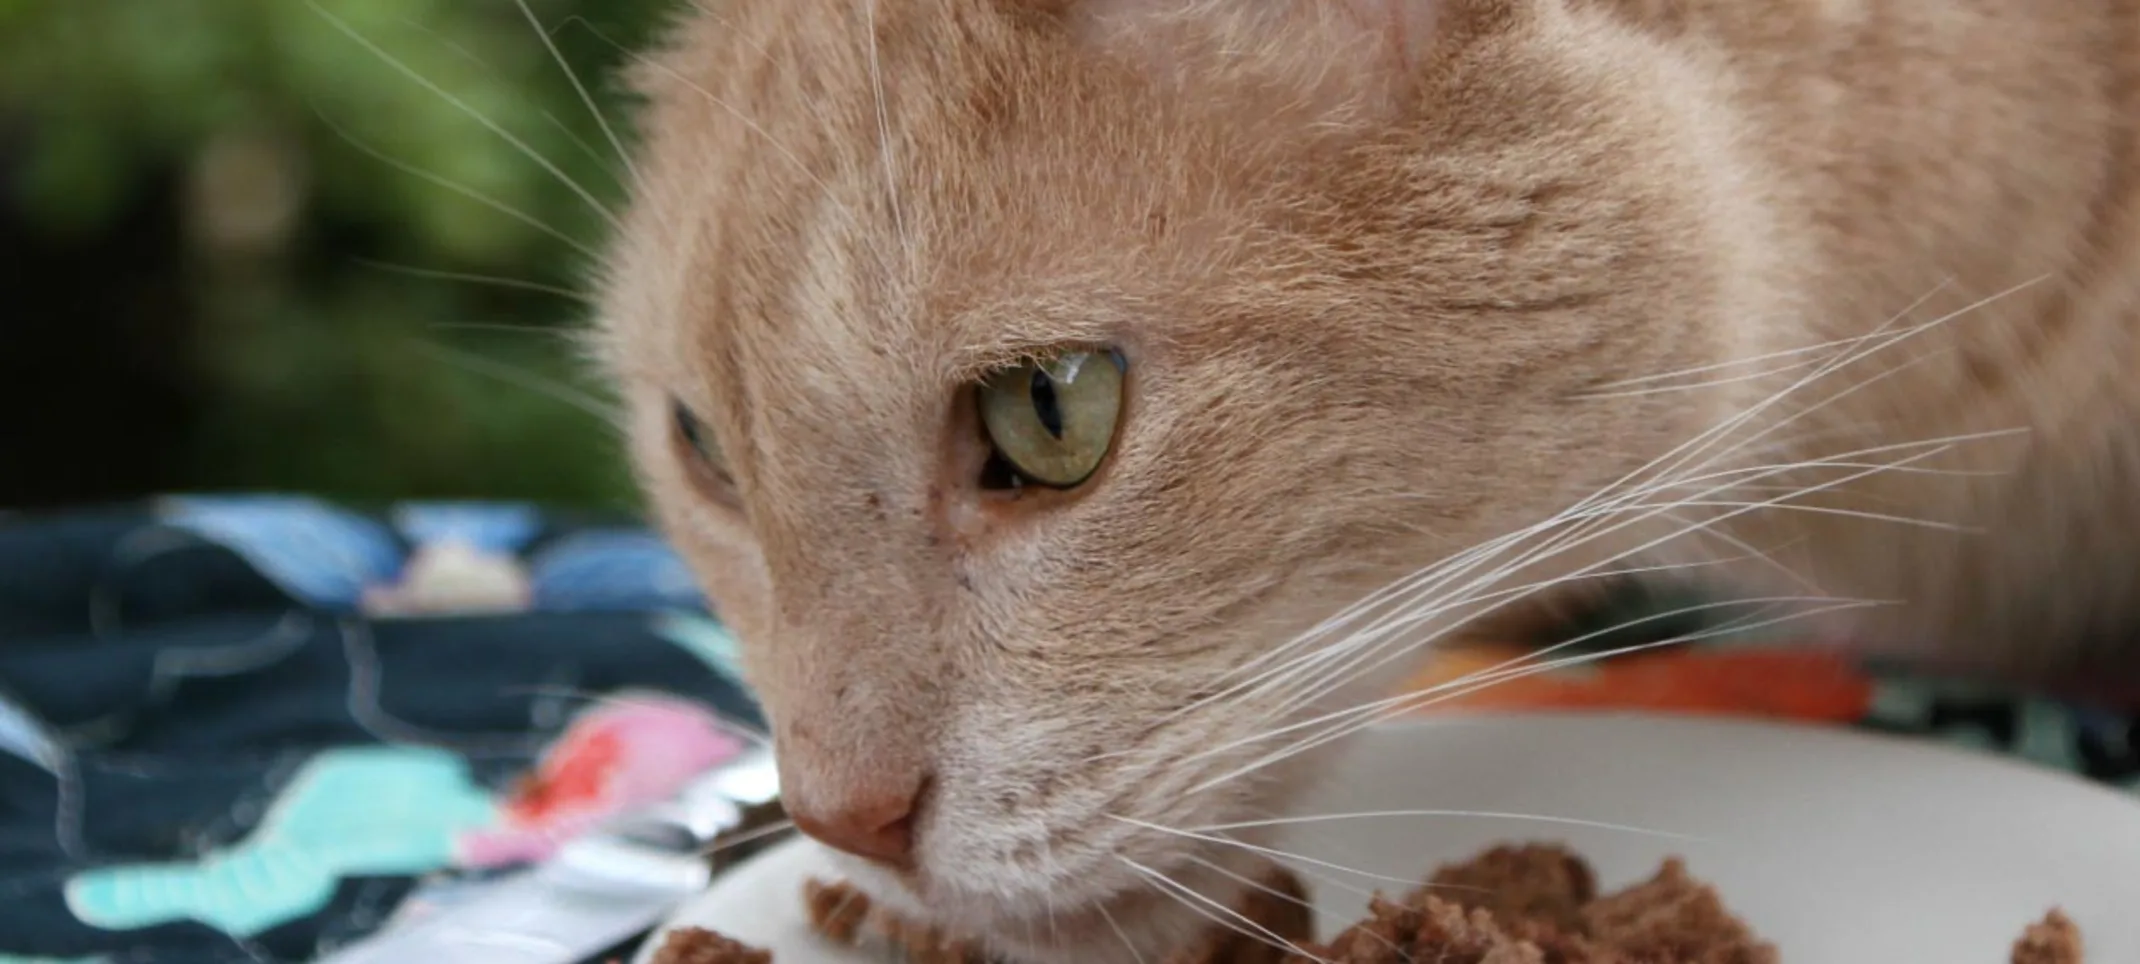 Cat eating cat food off of a small paper plate